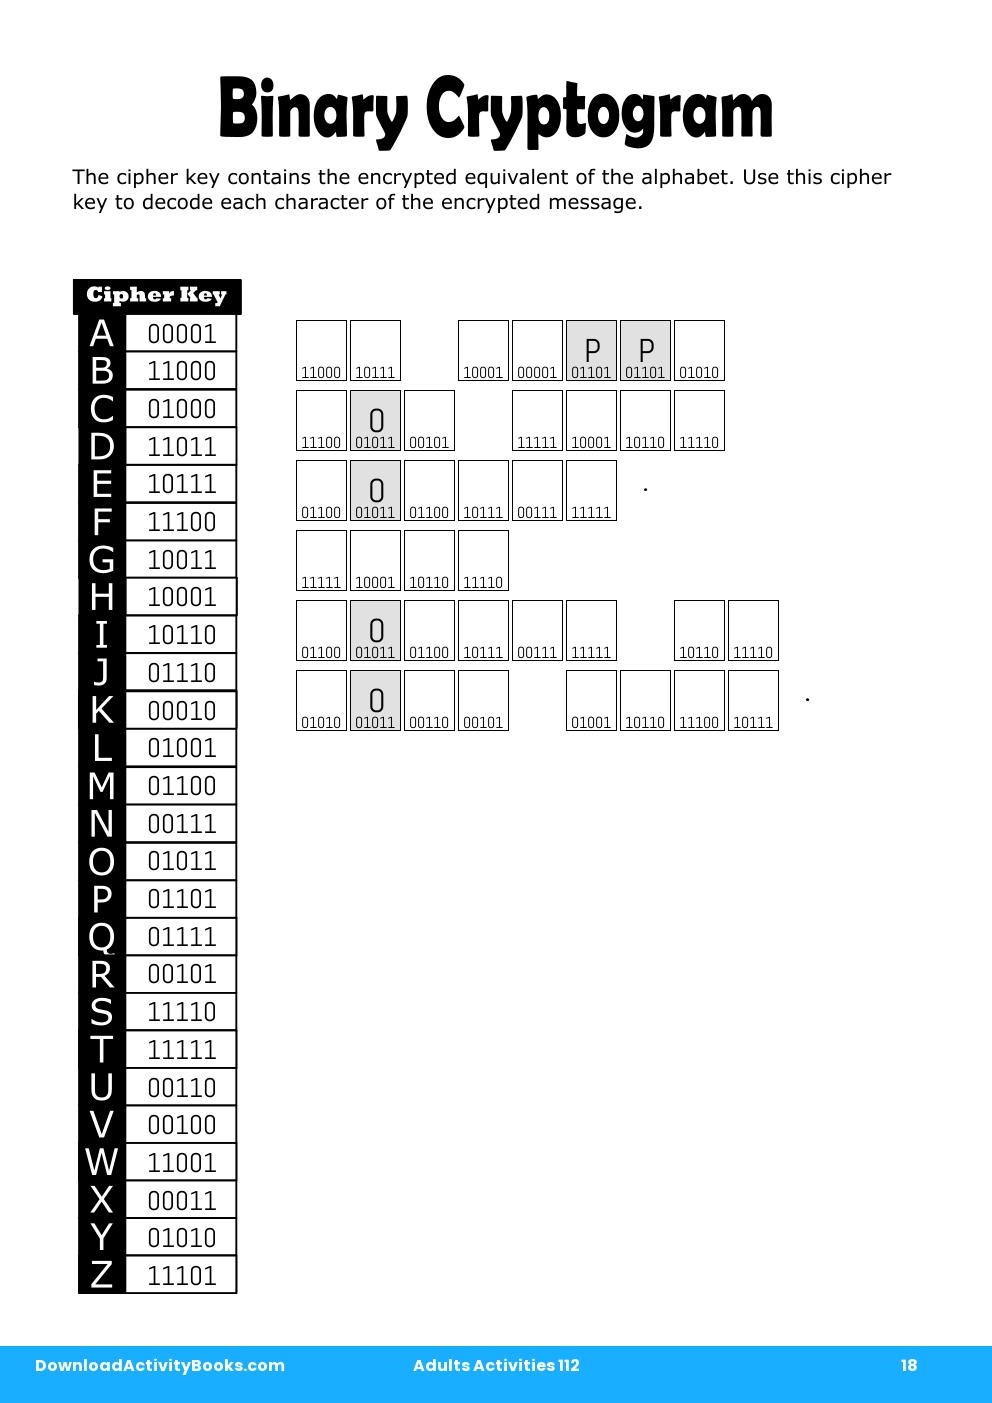 Binary Cryptogram in Adults Activities 112